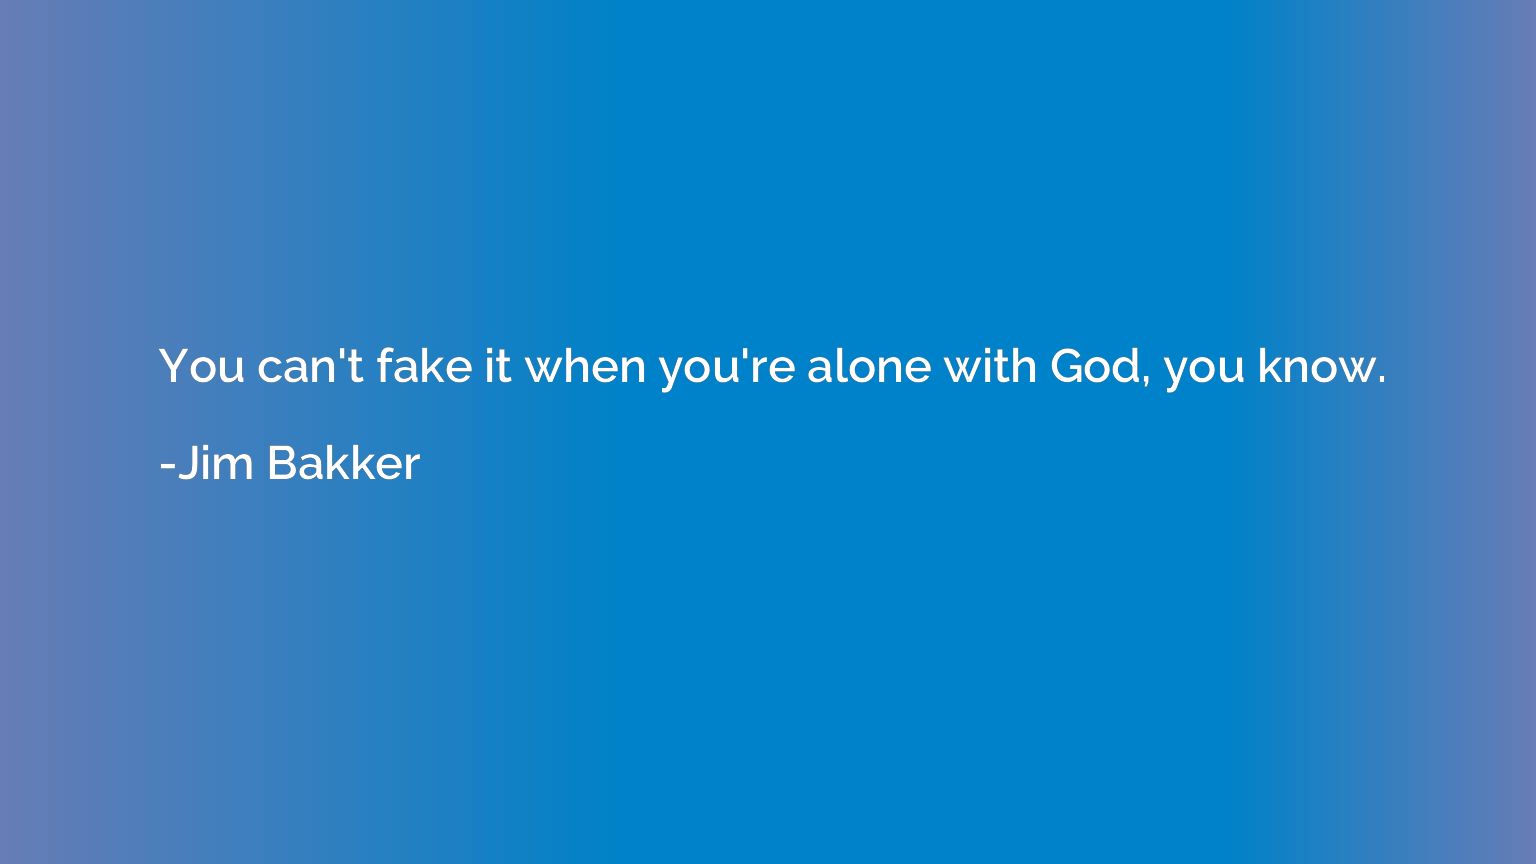 You can't fake it when you're alone with God, you know.